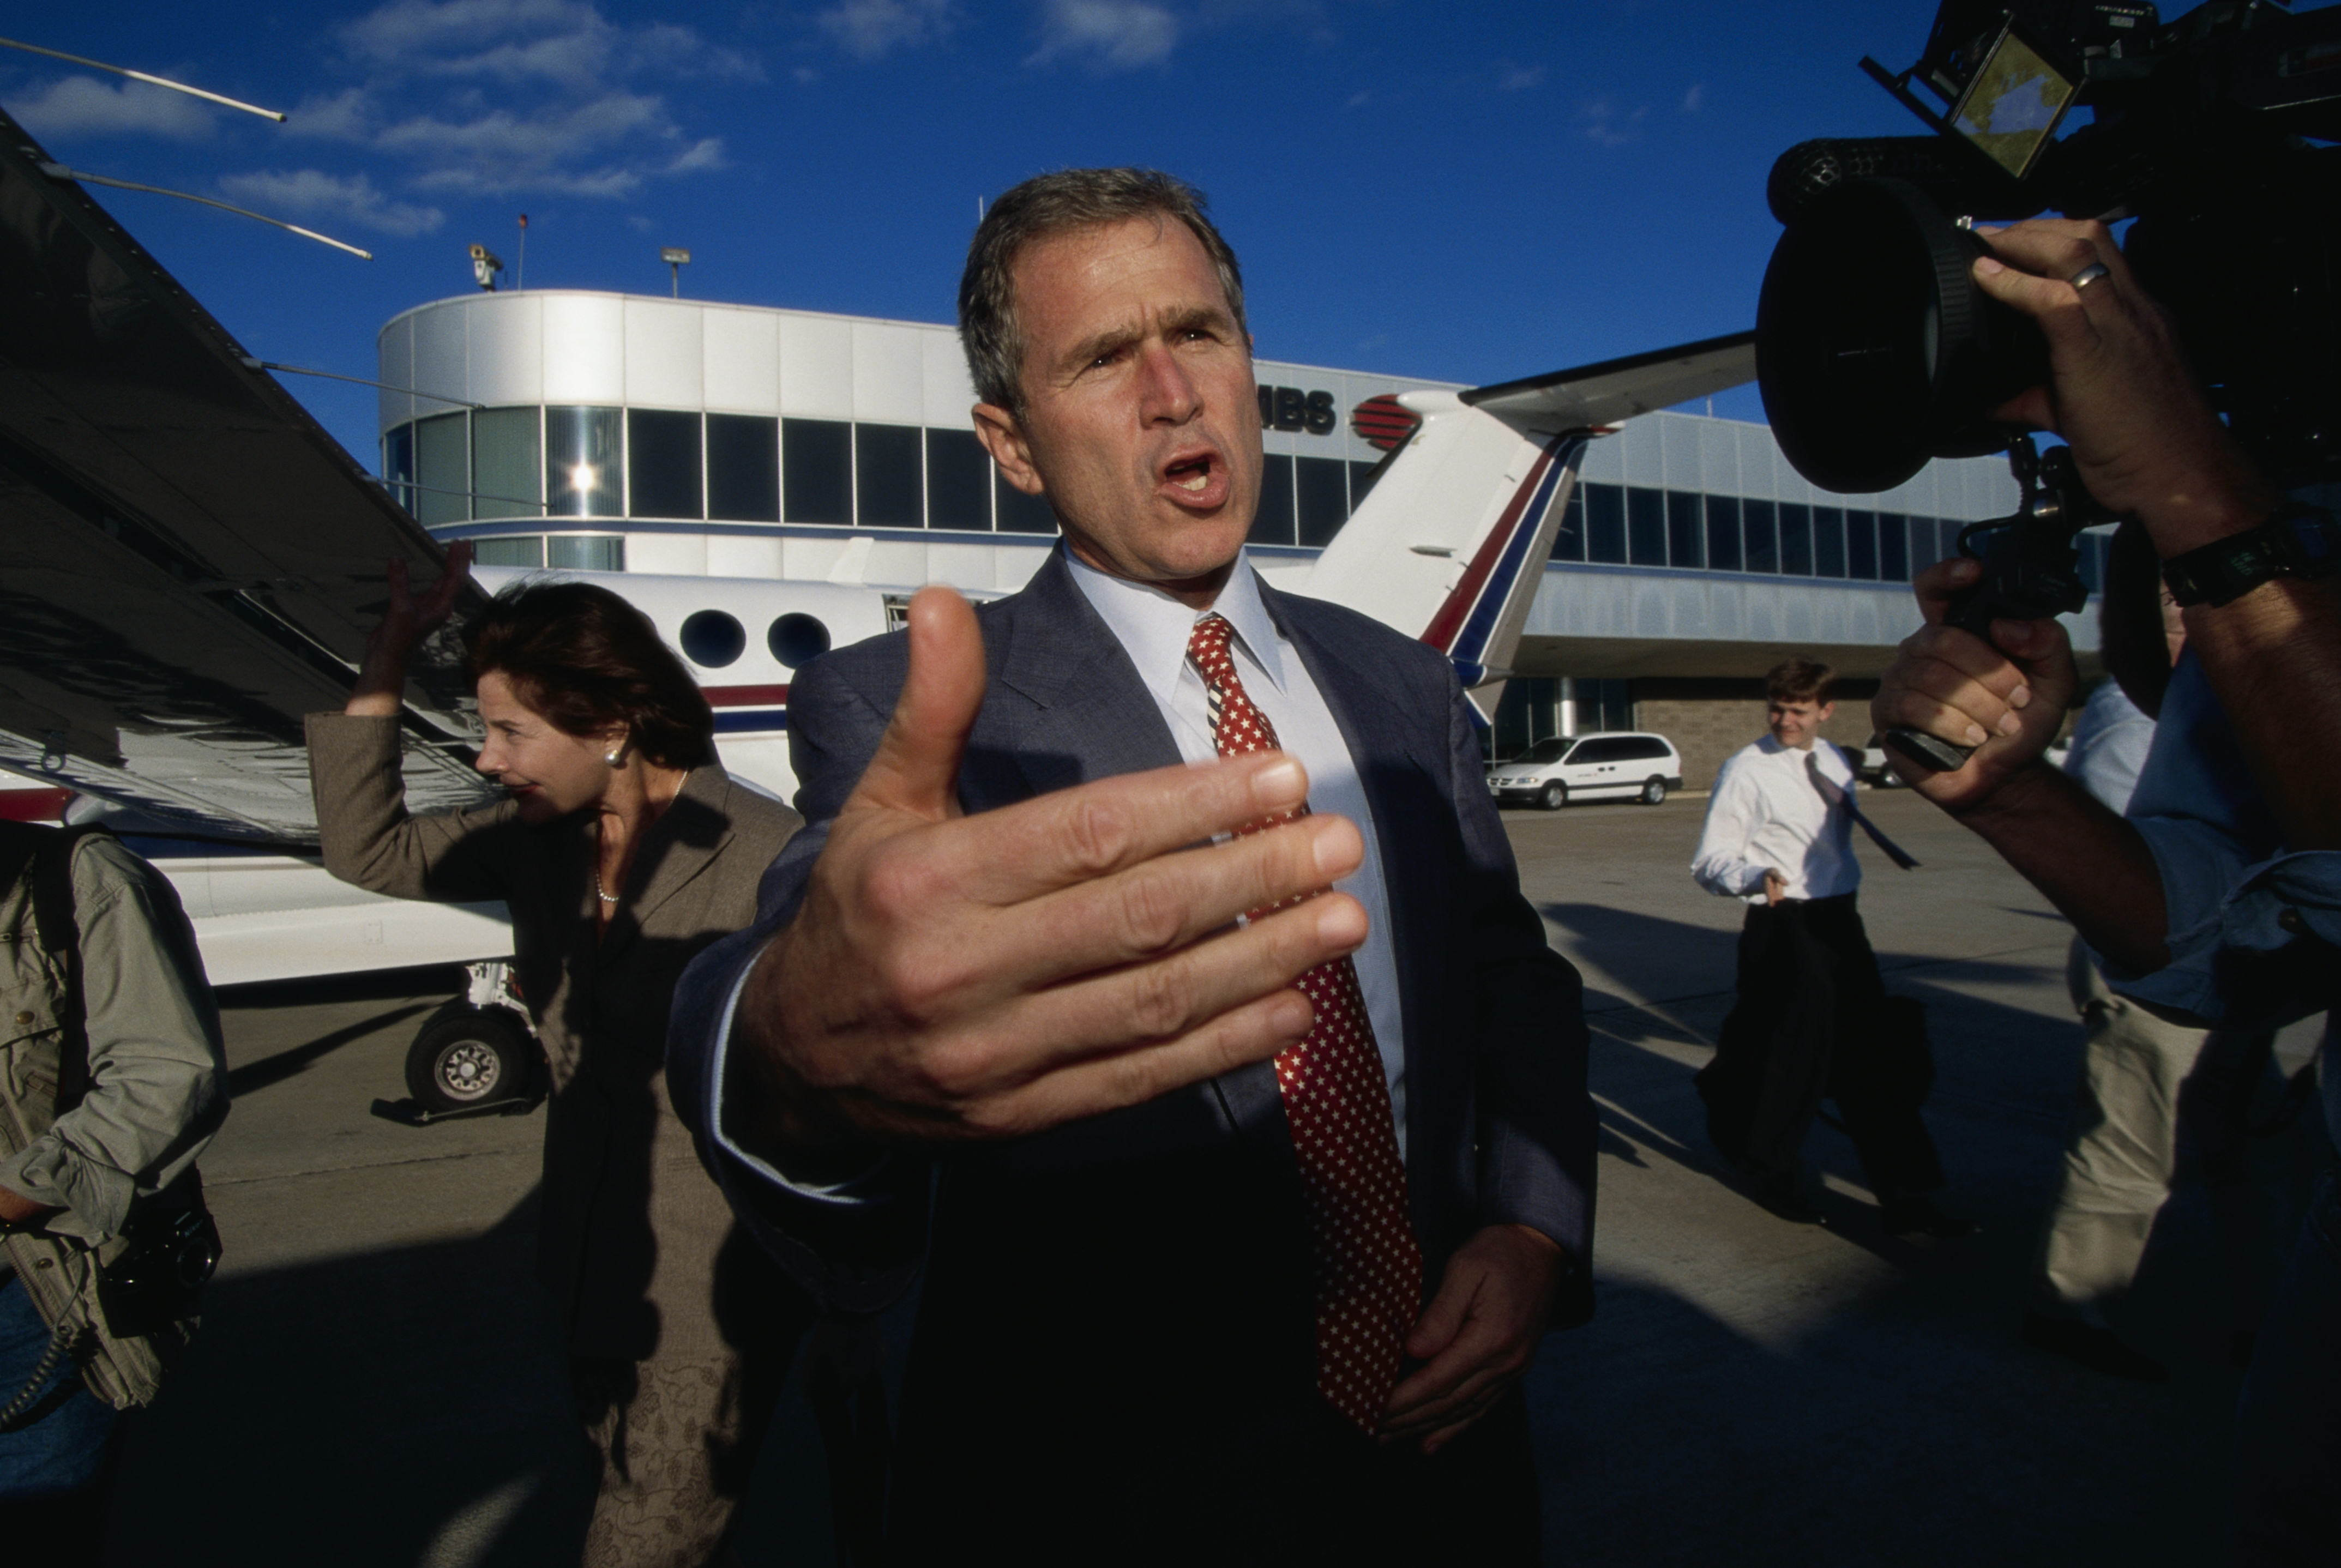 George W. Bush talks, gesturing in front of a camera at the Dallas airport in 1998.